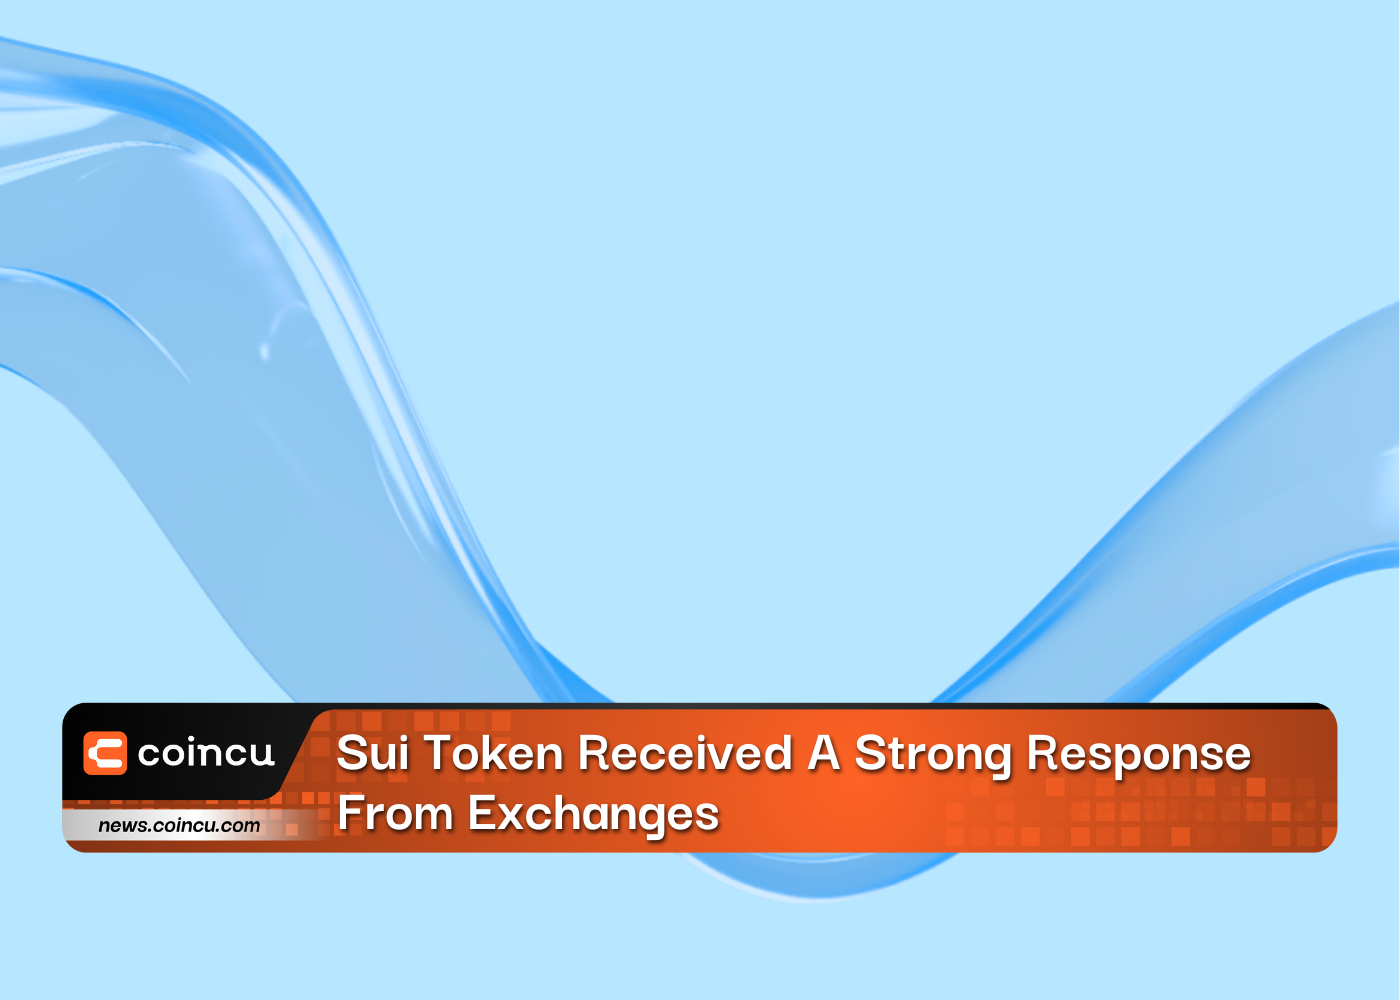 Sui Token Received A Strong Response From Exchanges